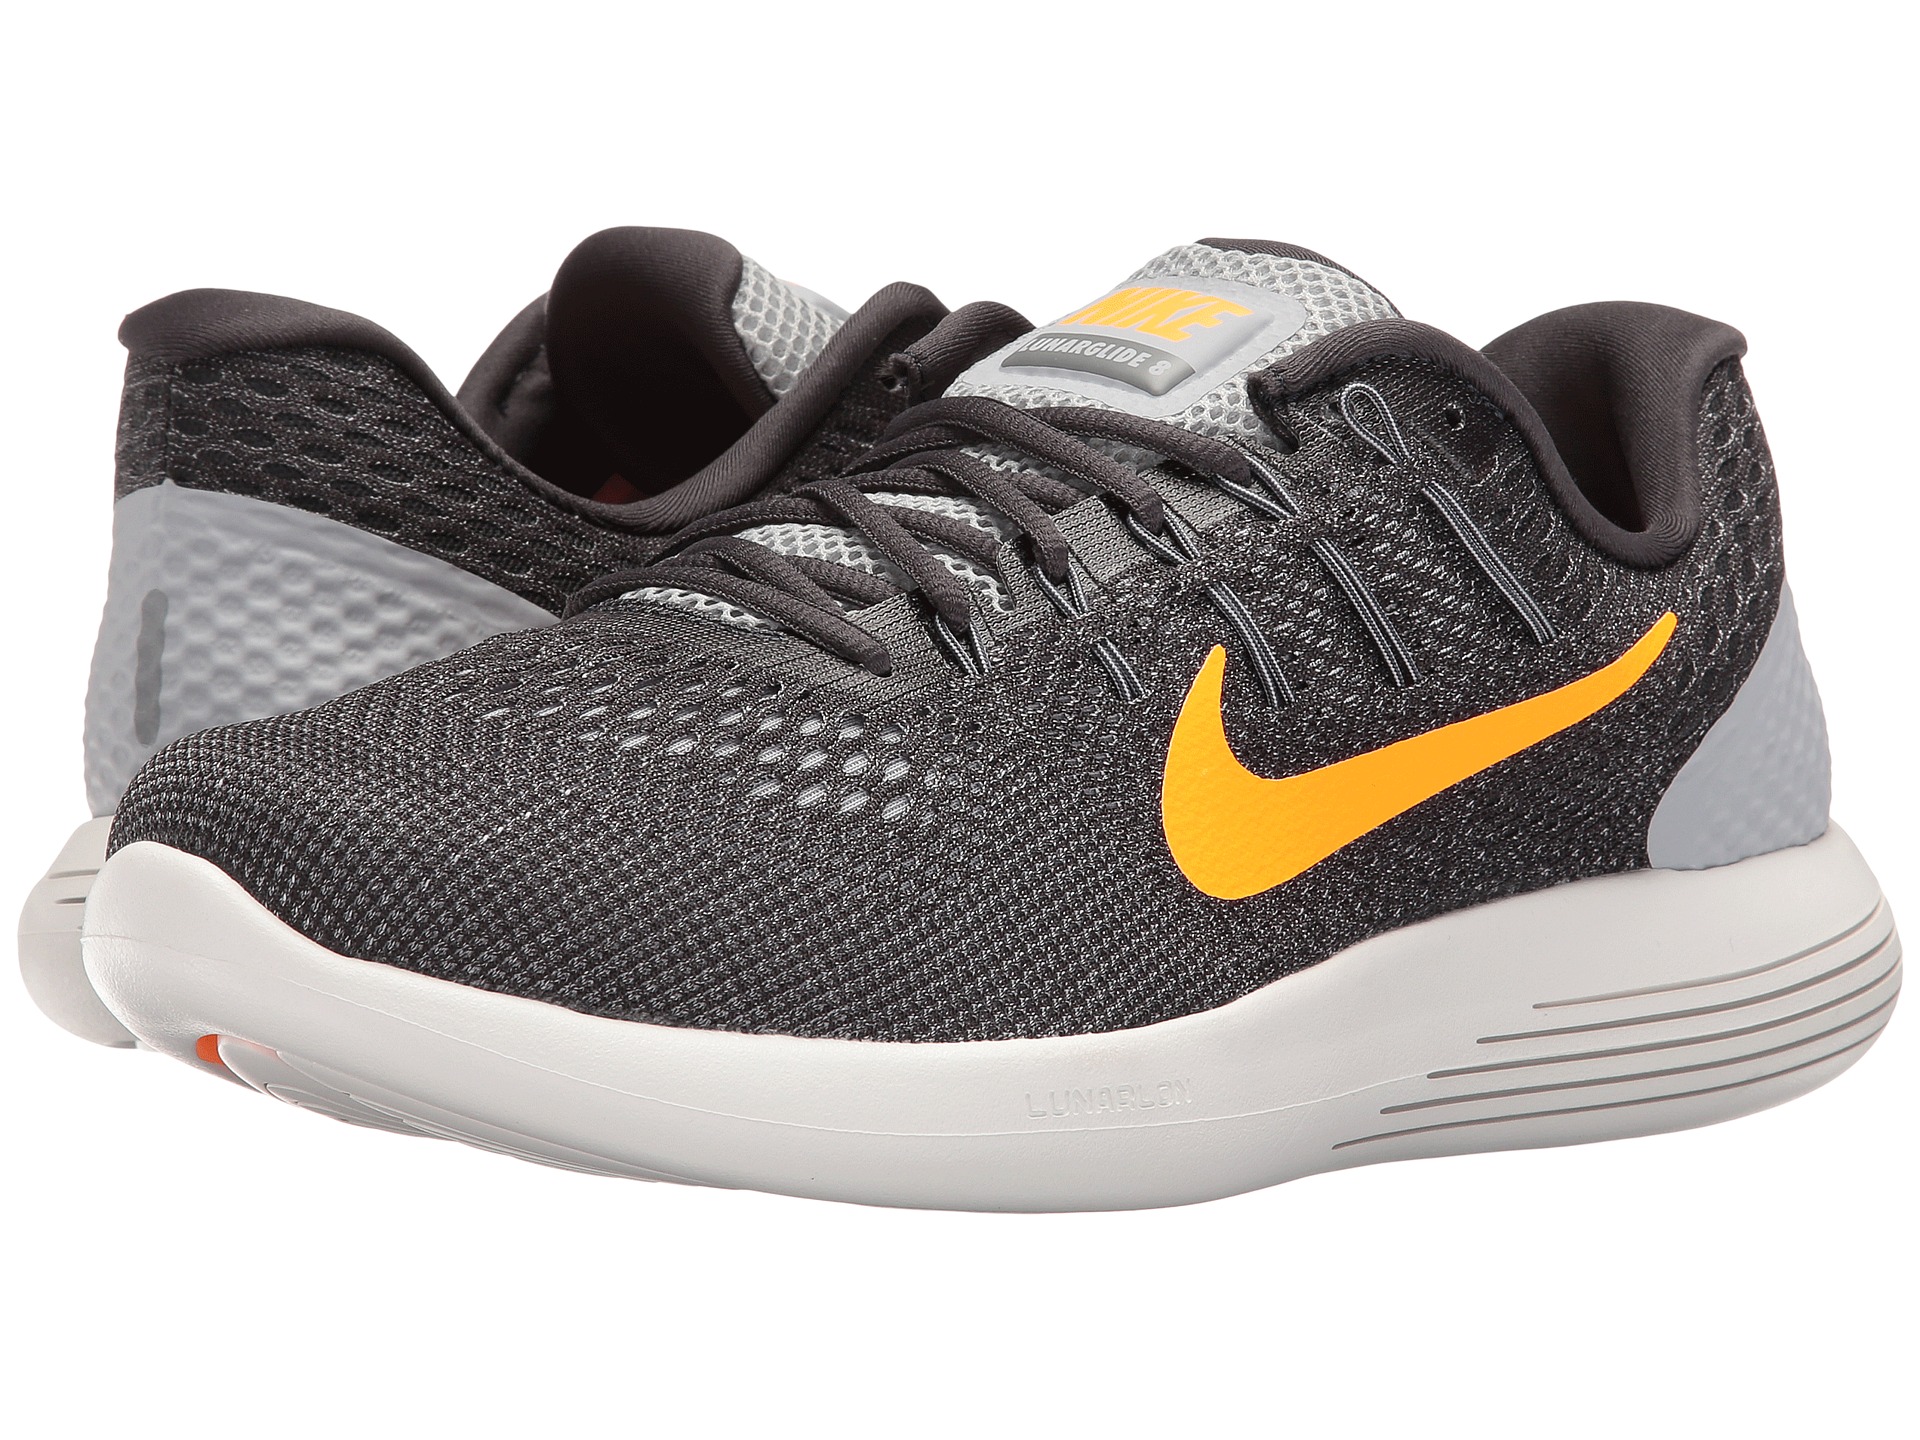 Nike Lunarglide 8 Wolf Grey/Anthracite/Cool Grey/Bright Citrus - Zappos ...